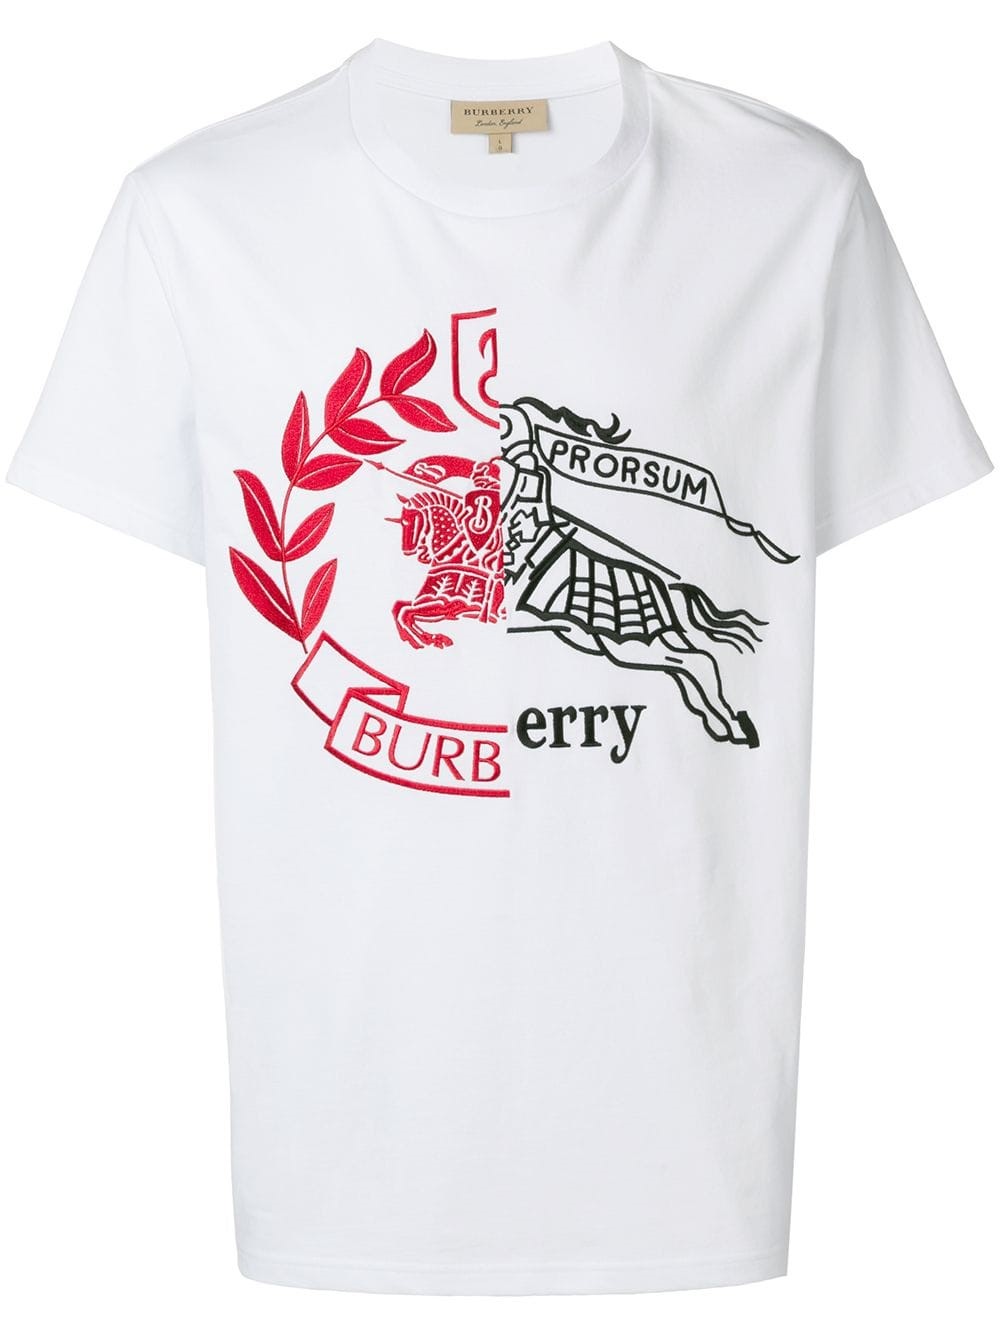 burberry SOLEFORT LOGO T-SHIRT available on montiboutique.com - 26412